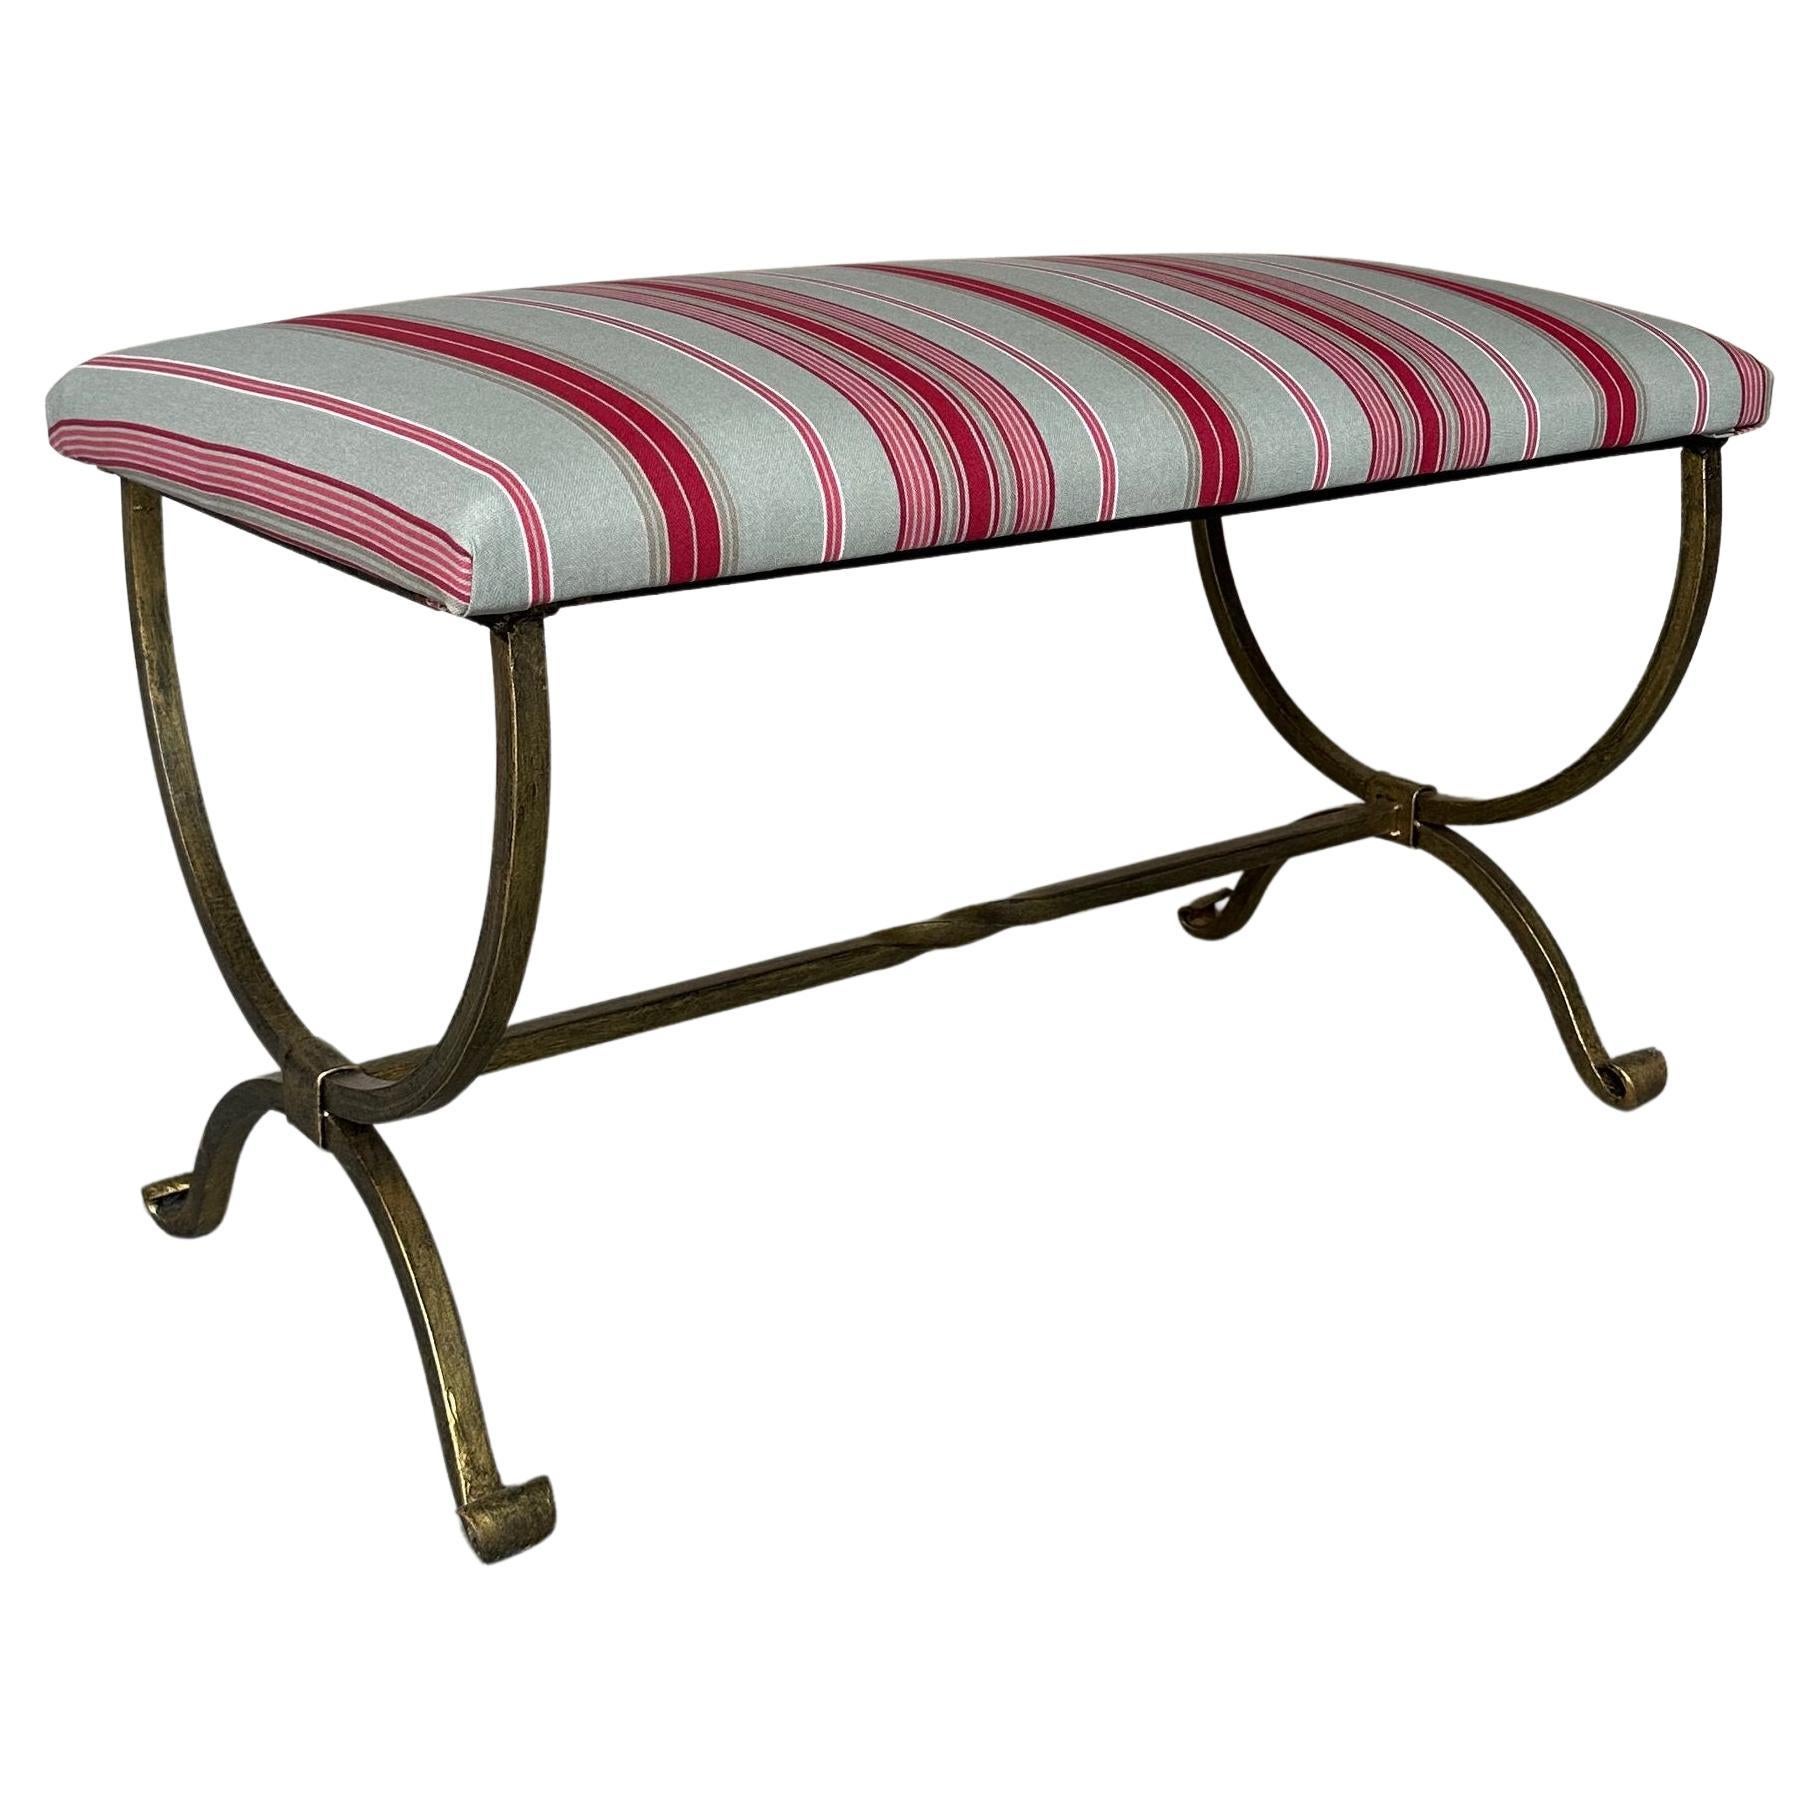 Spanish Iron Bench with Scrolled Legs For Sale